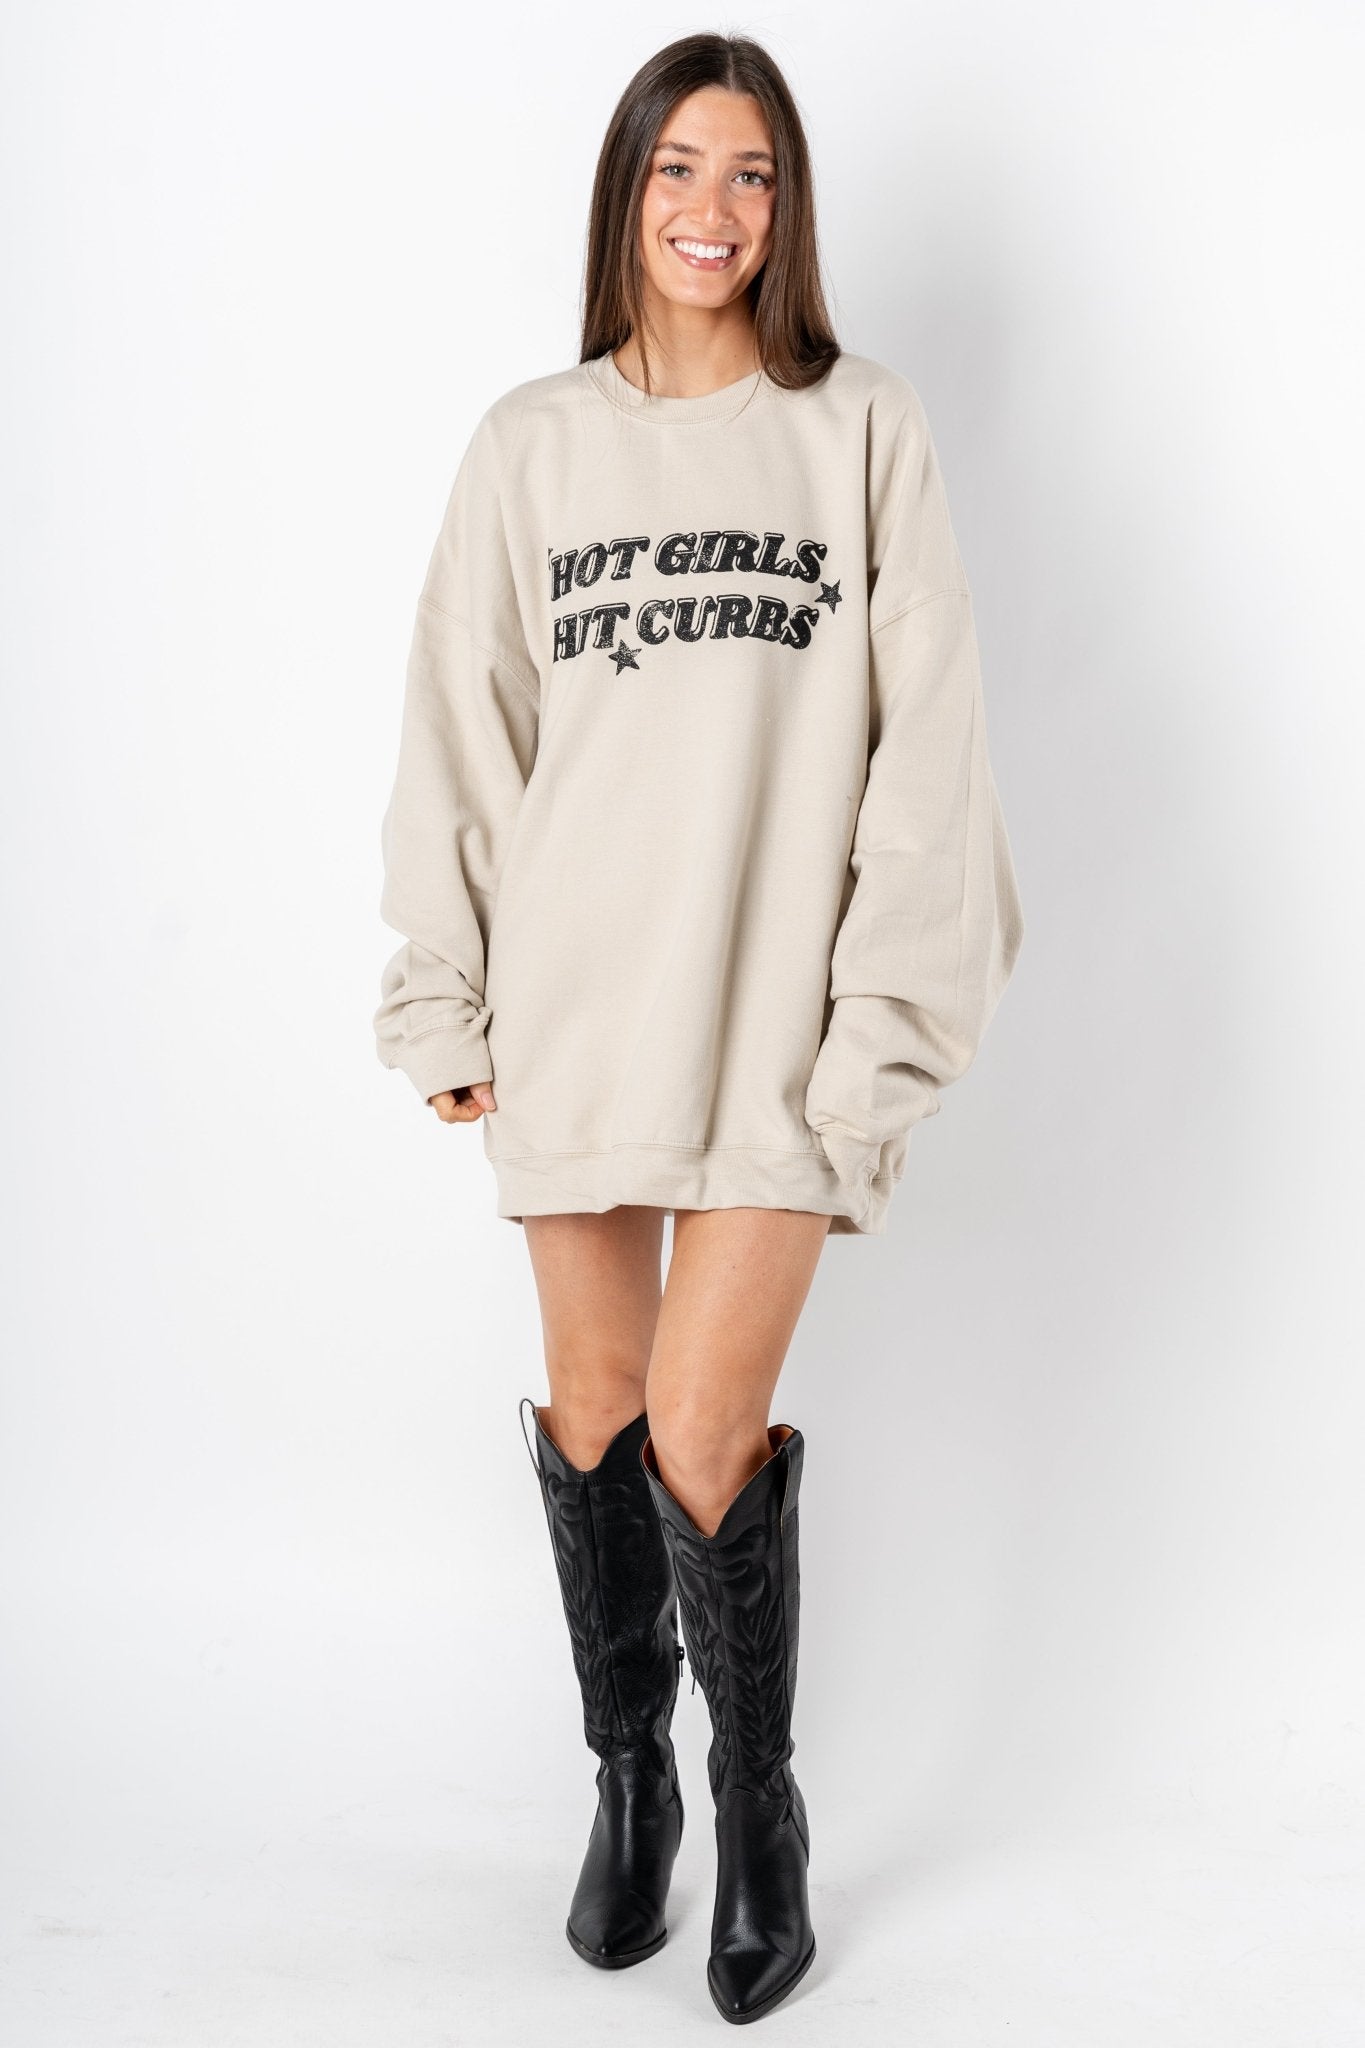 Hot girls hit curbs oversized thrifted sweatshirt sand - Trendy T-shirts - Cute Graphic Tee Fashion at Lush Fashion Lounge Boutique in Oklahoma